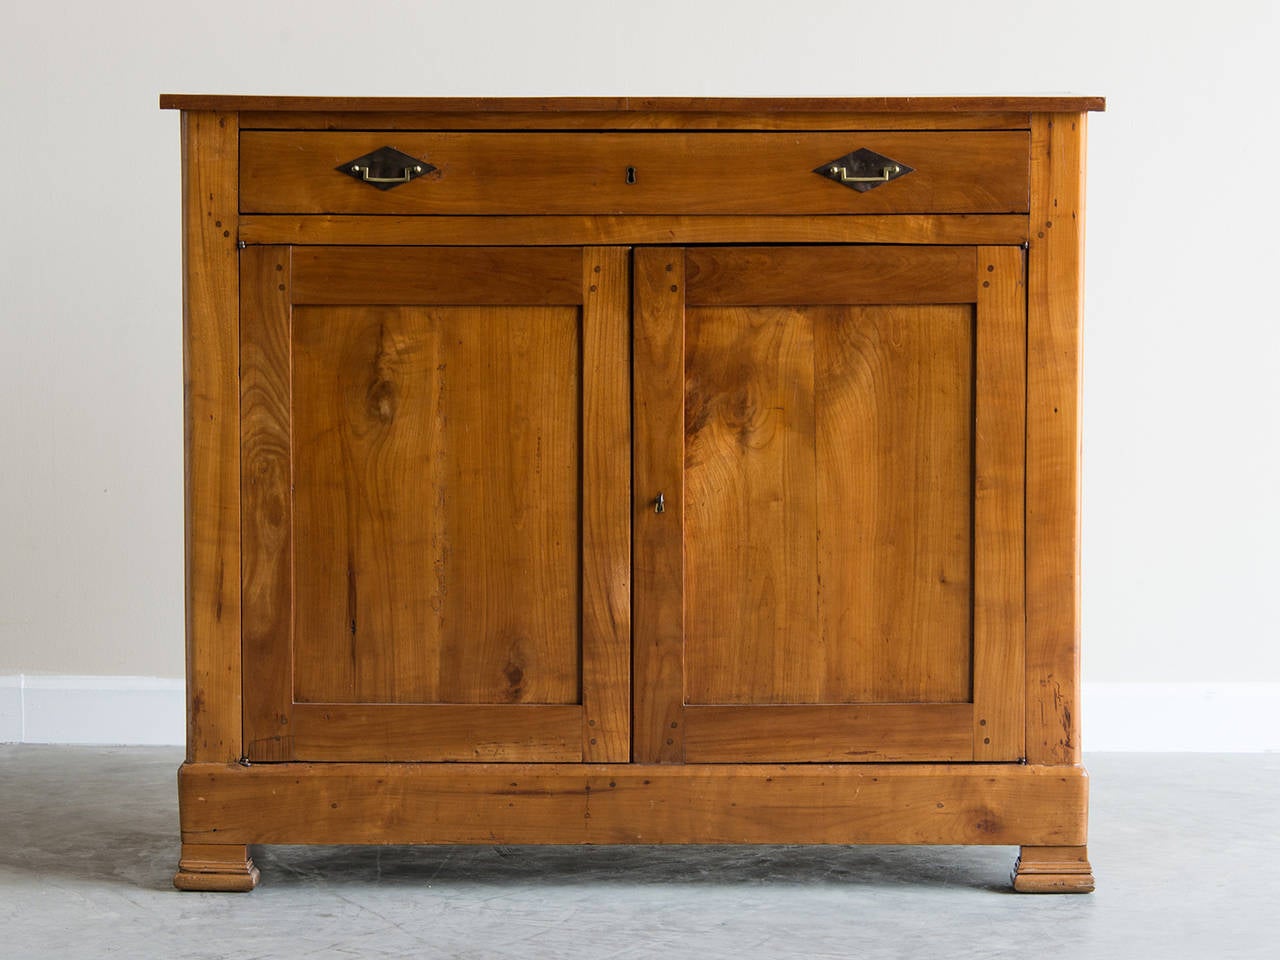 The tall and slender profile of this cherrywood antique French buffet accentuates its elegant appearance. Dating from the Louis Philippe period (1830-1848) the buffet embodies current desire for simplicity and style. The cherrywood timber has an